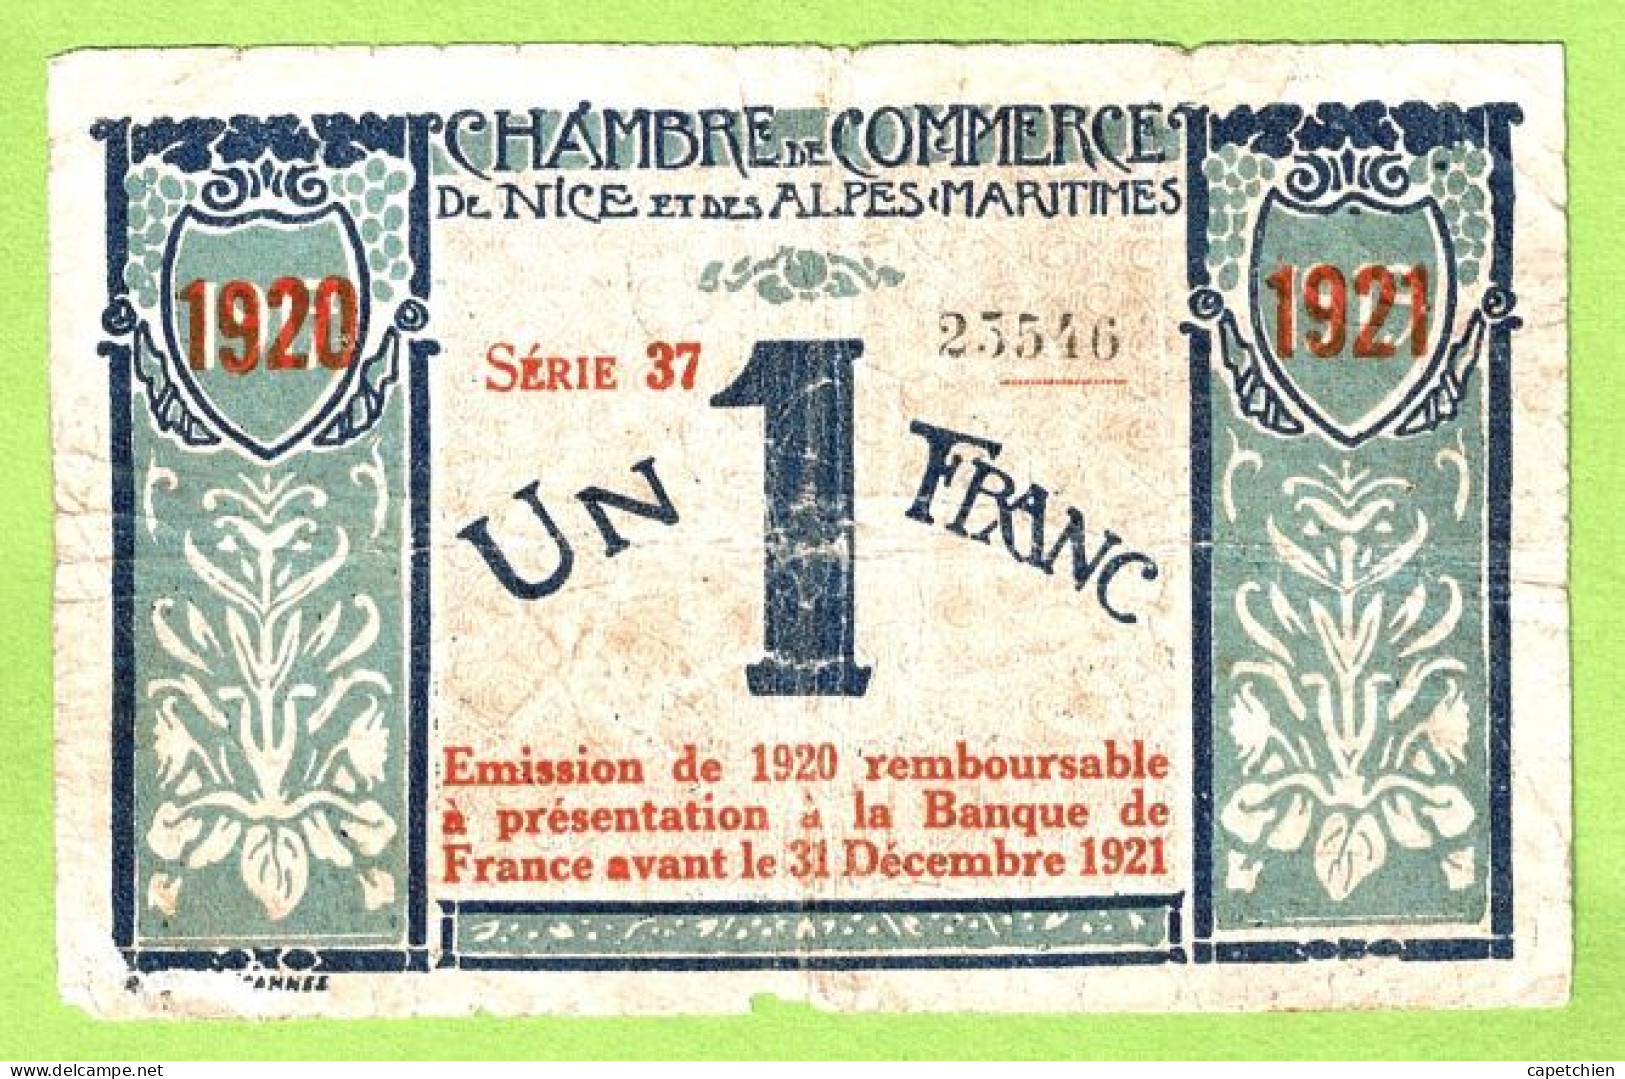 FRANCE / CHAMBRE De COMMERCE / NICE - ALPES MARITIMES / 1 FRANC / 1917-1919 SURCHARGE ROUGE 1920-1921 / N° 23546 / S 37 - Chamber Of Commerce